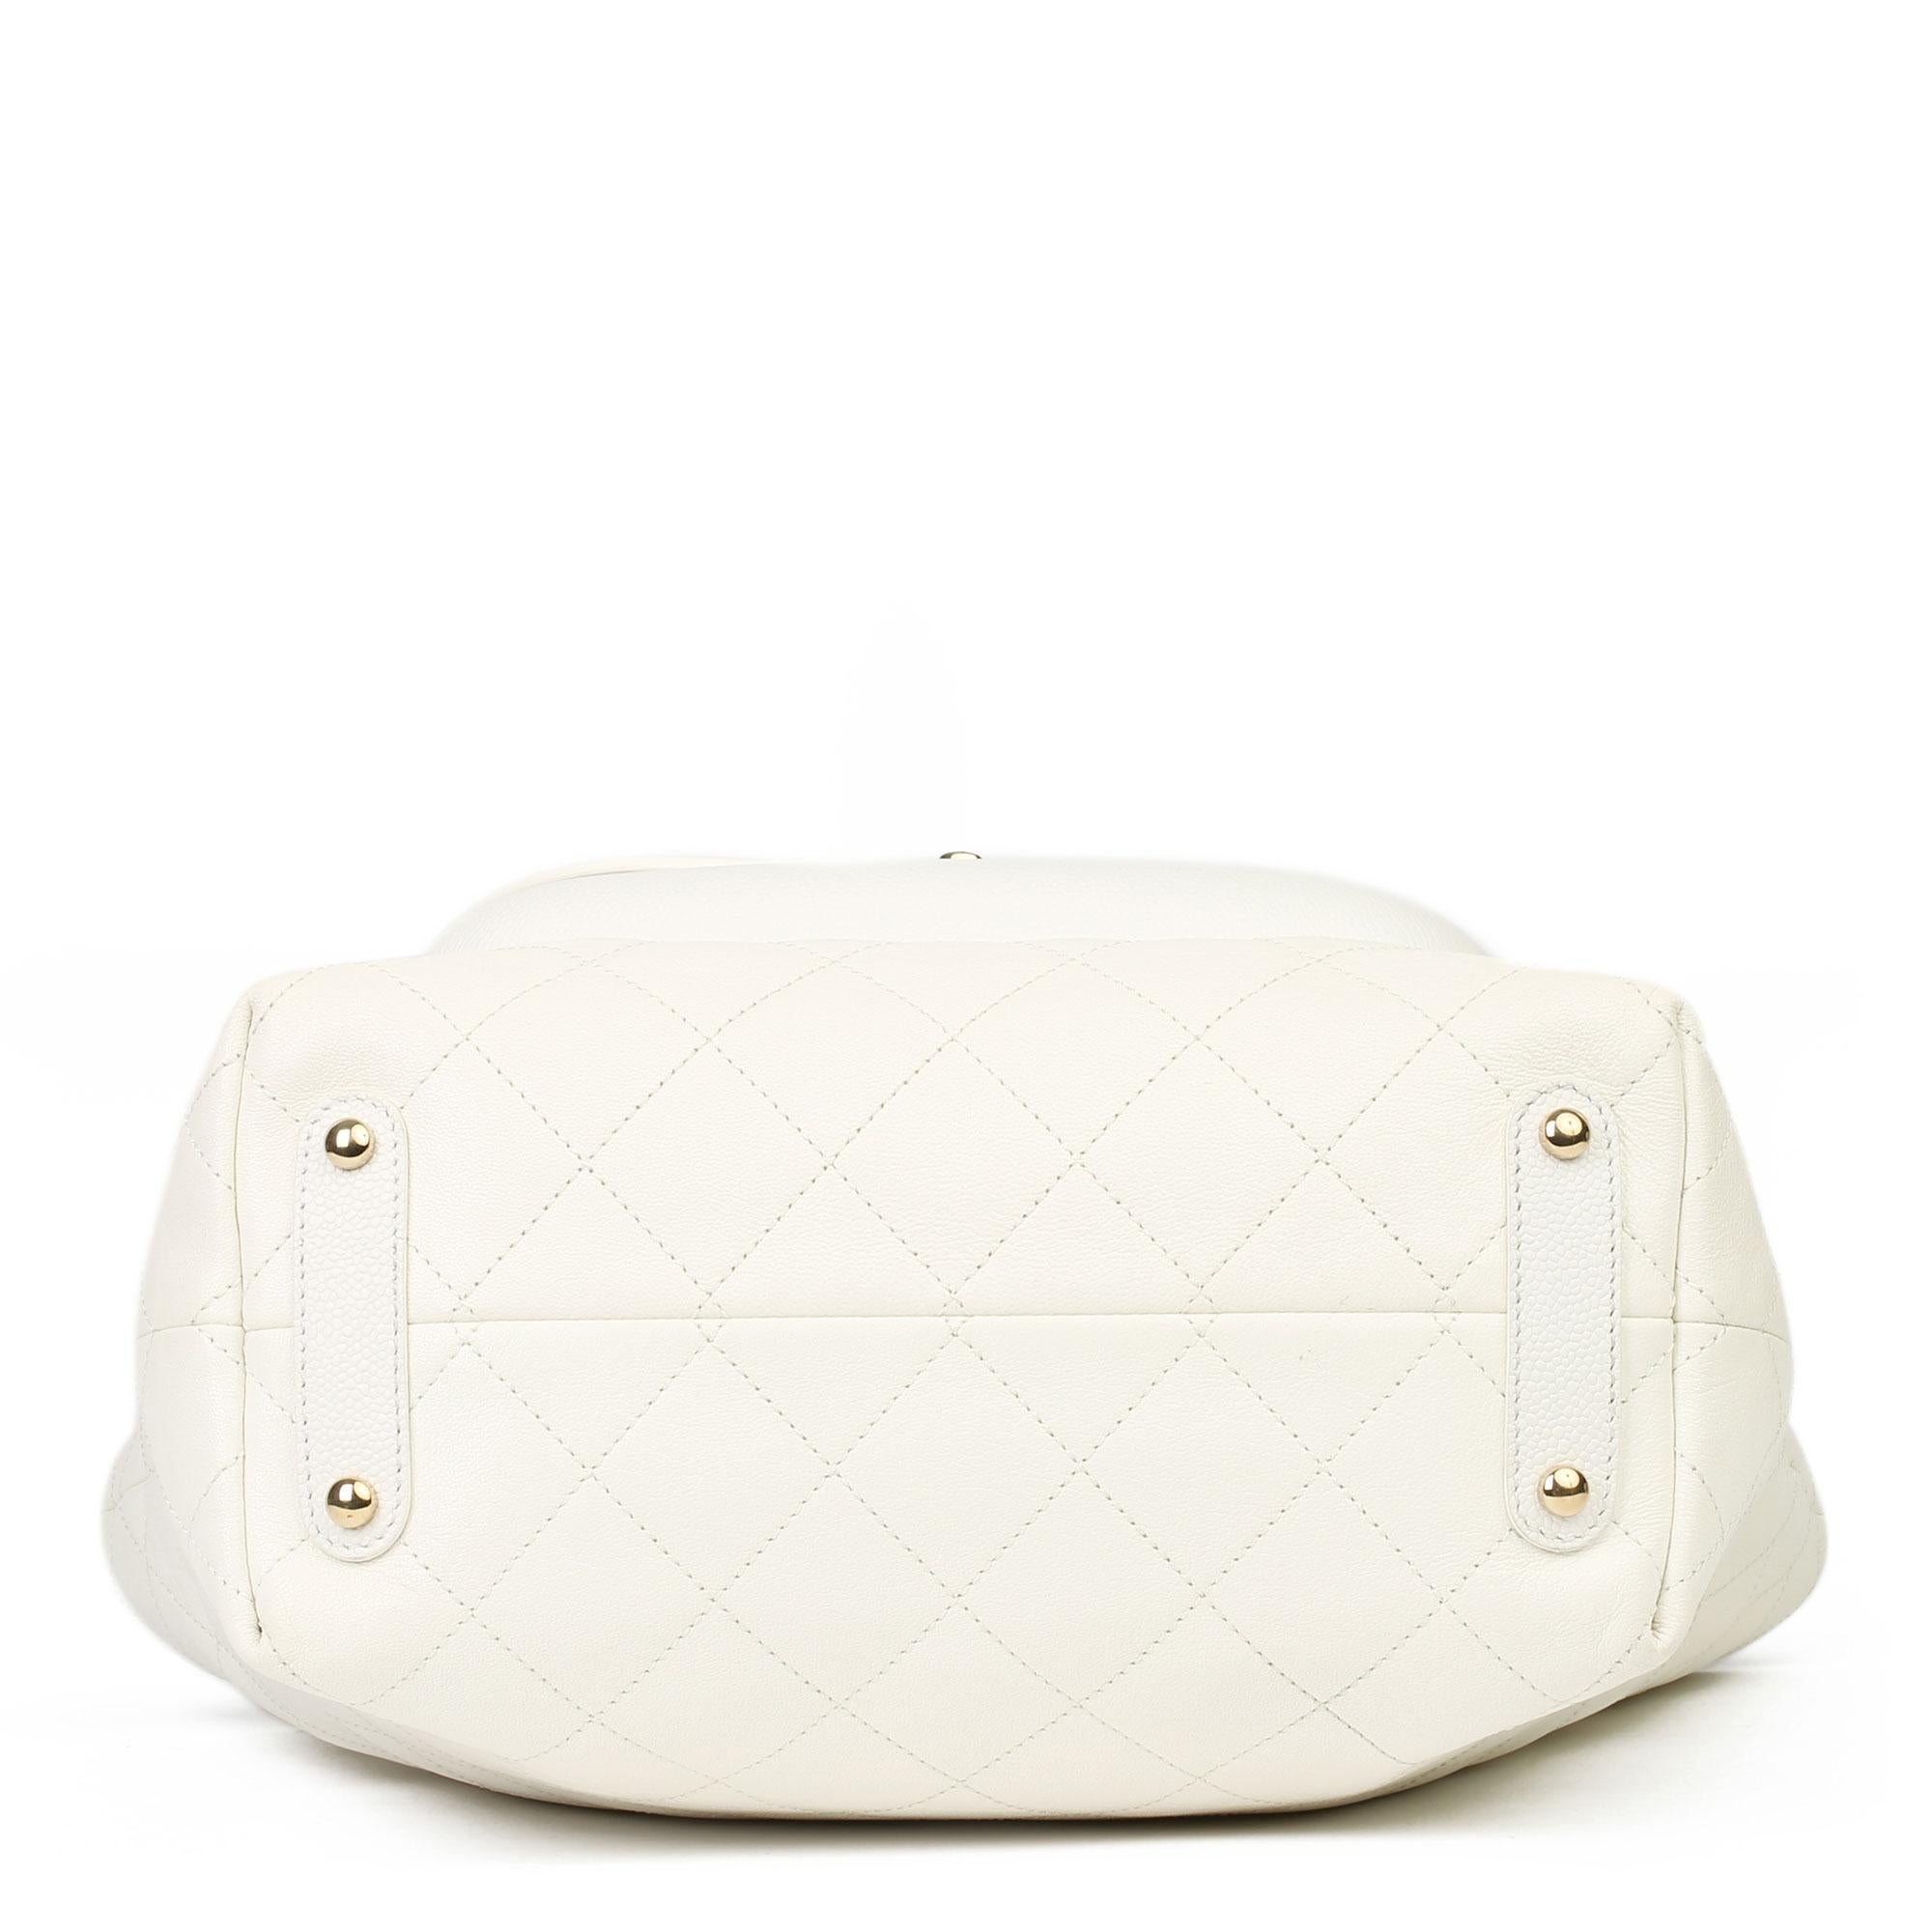 Gray Chanel White Quilted Calfskin & Caviar Leather Classic Tote